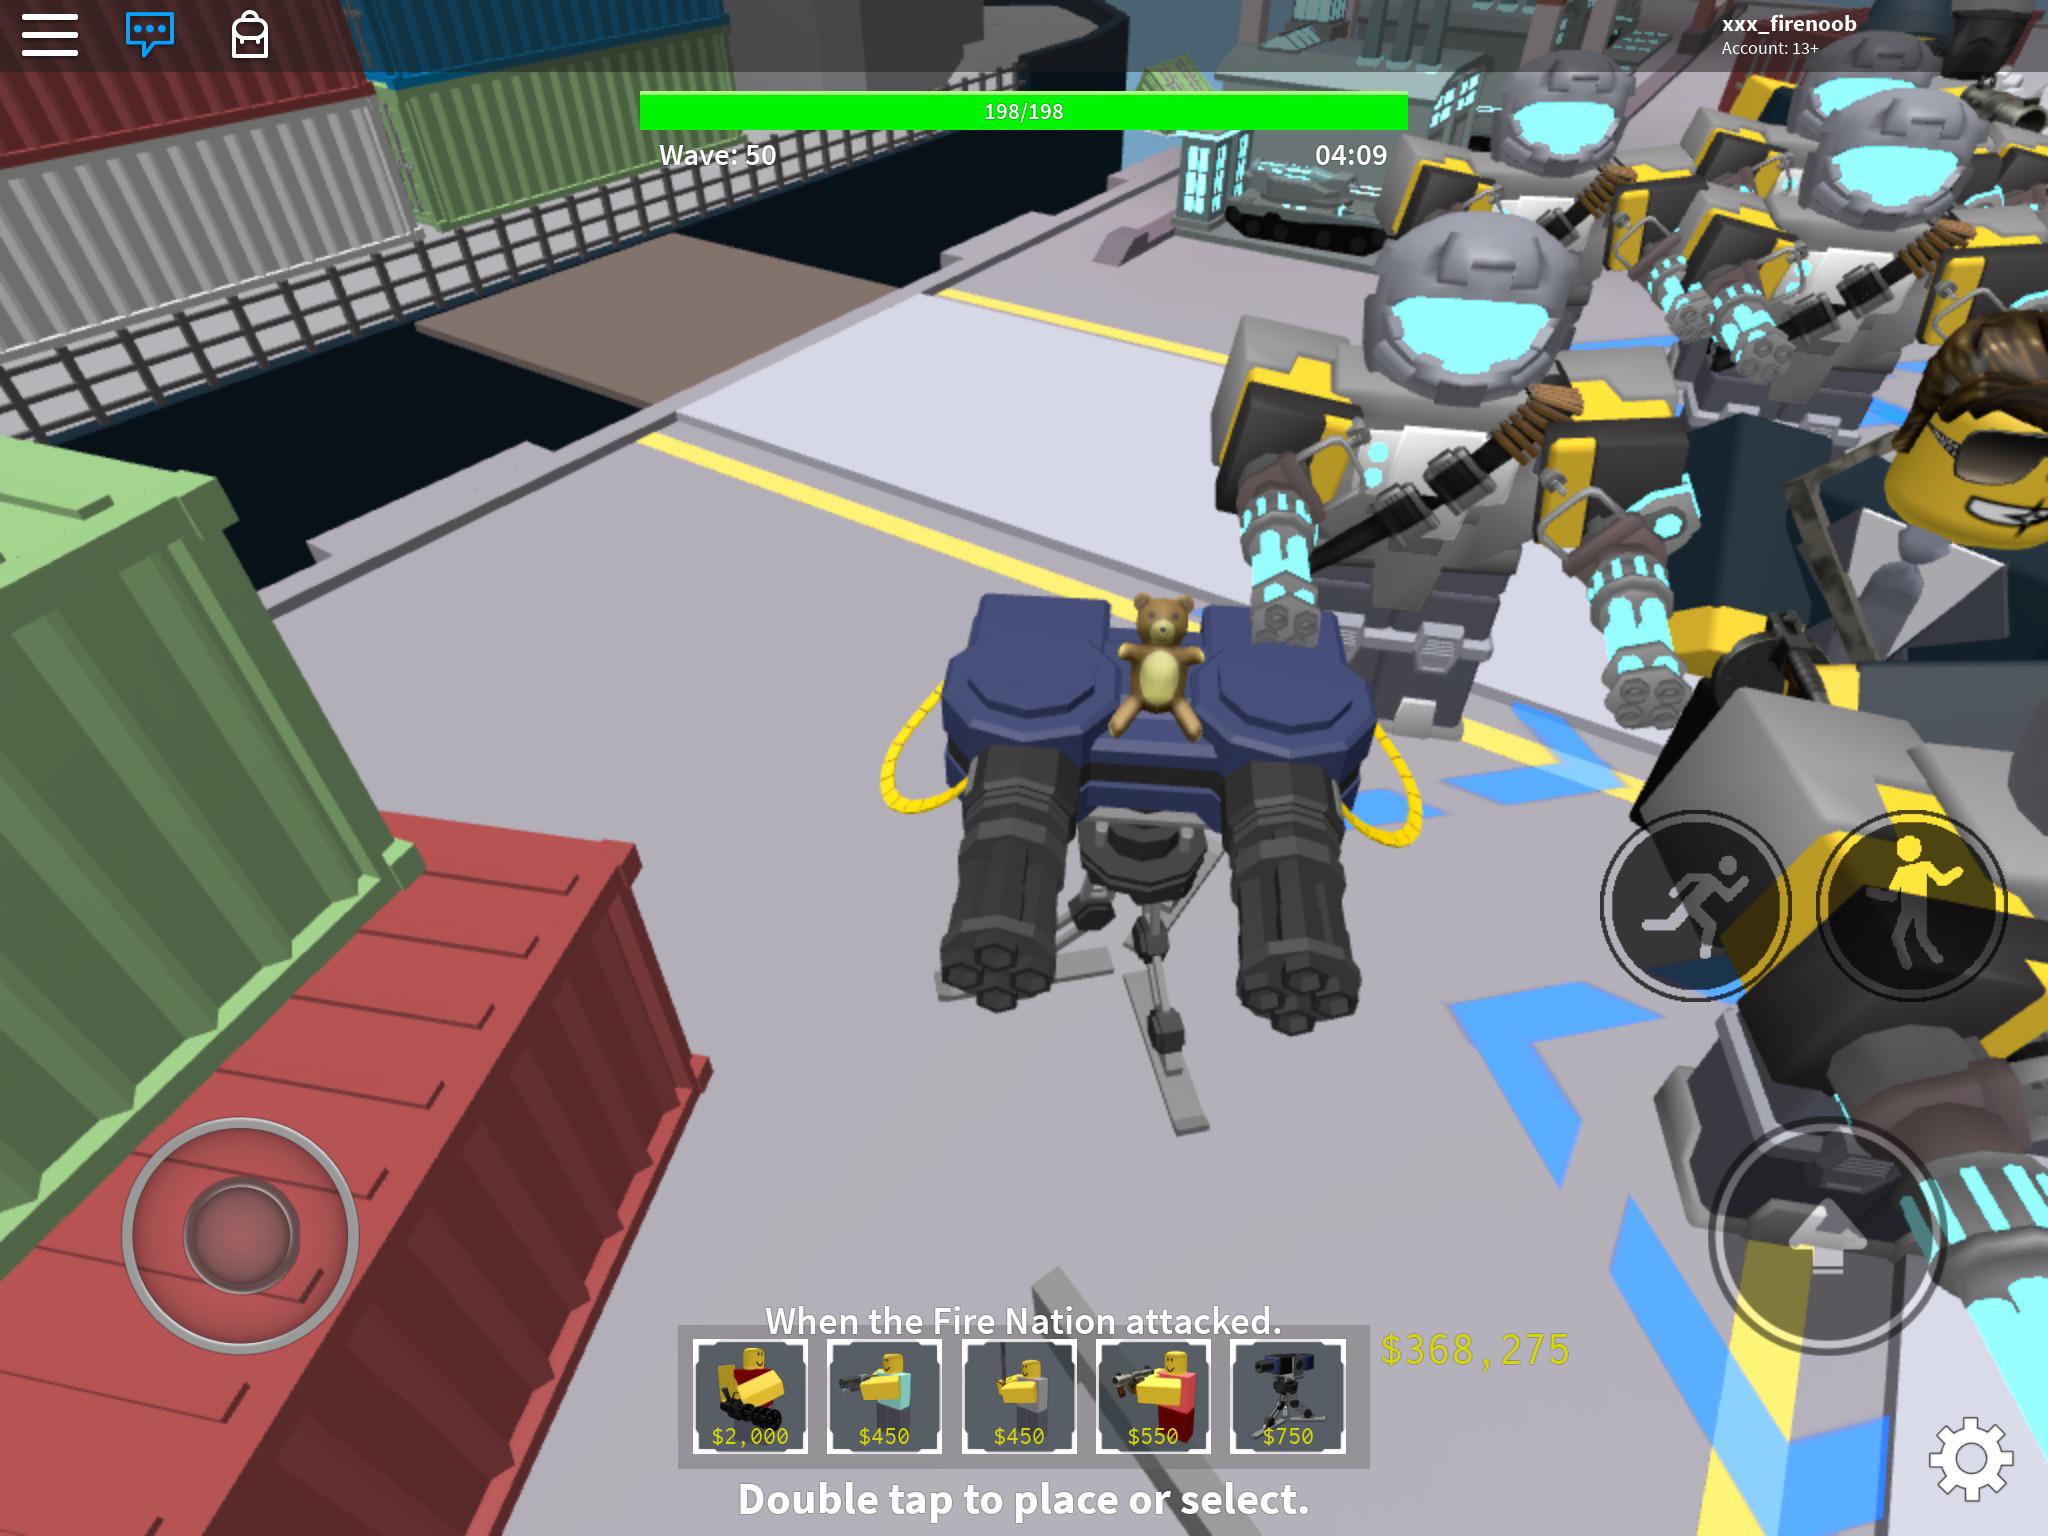 Something I found while playing Tower defense simulator: roblox